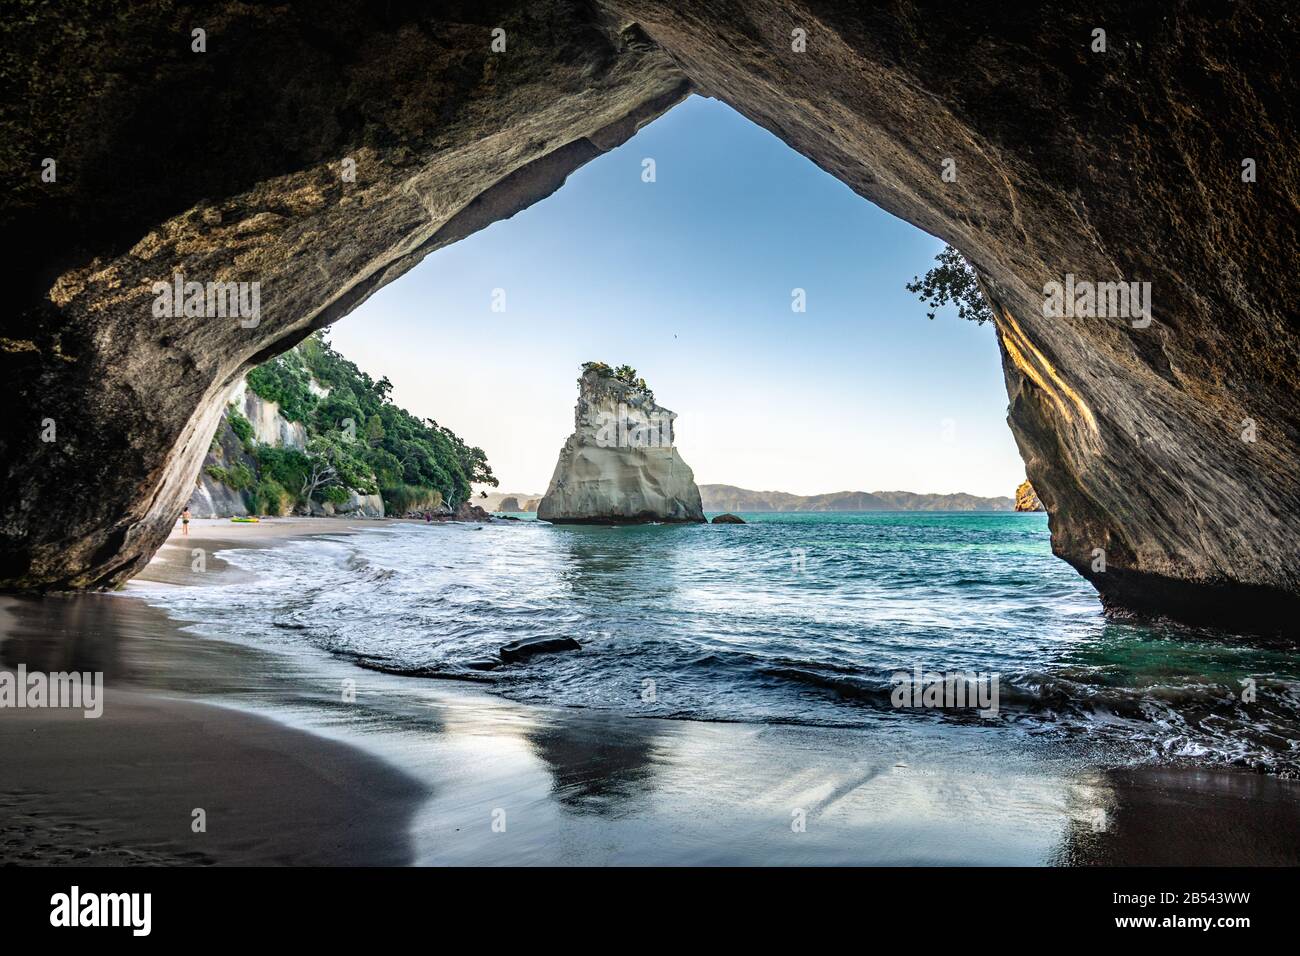 Looking through the Cathedral Cape rock arch in New Zealand Stock Photo